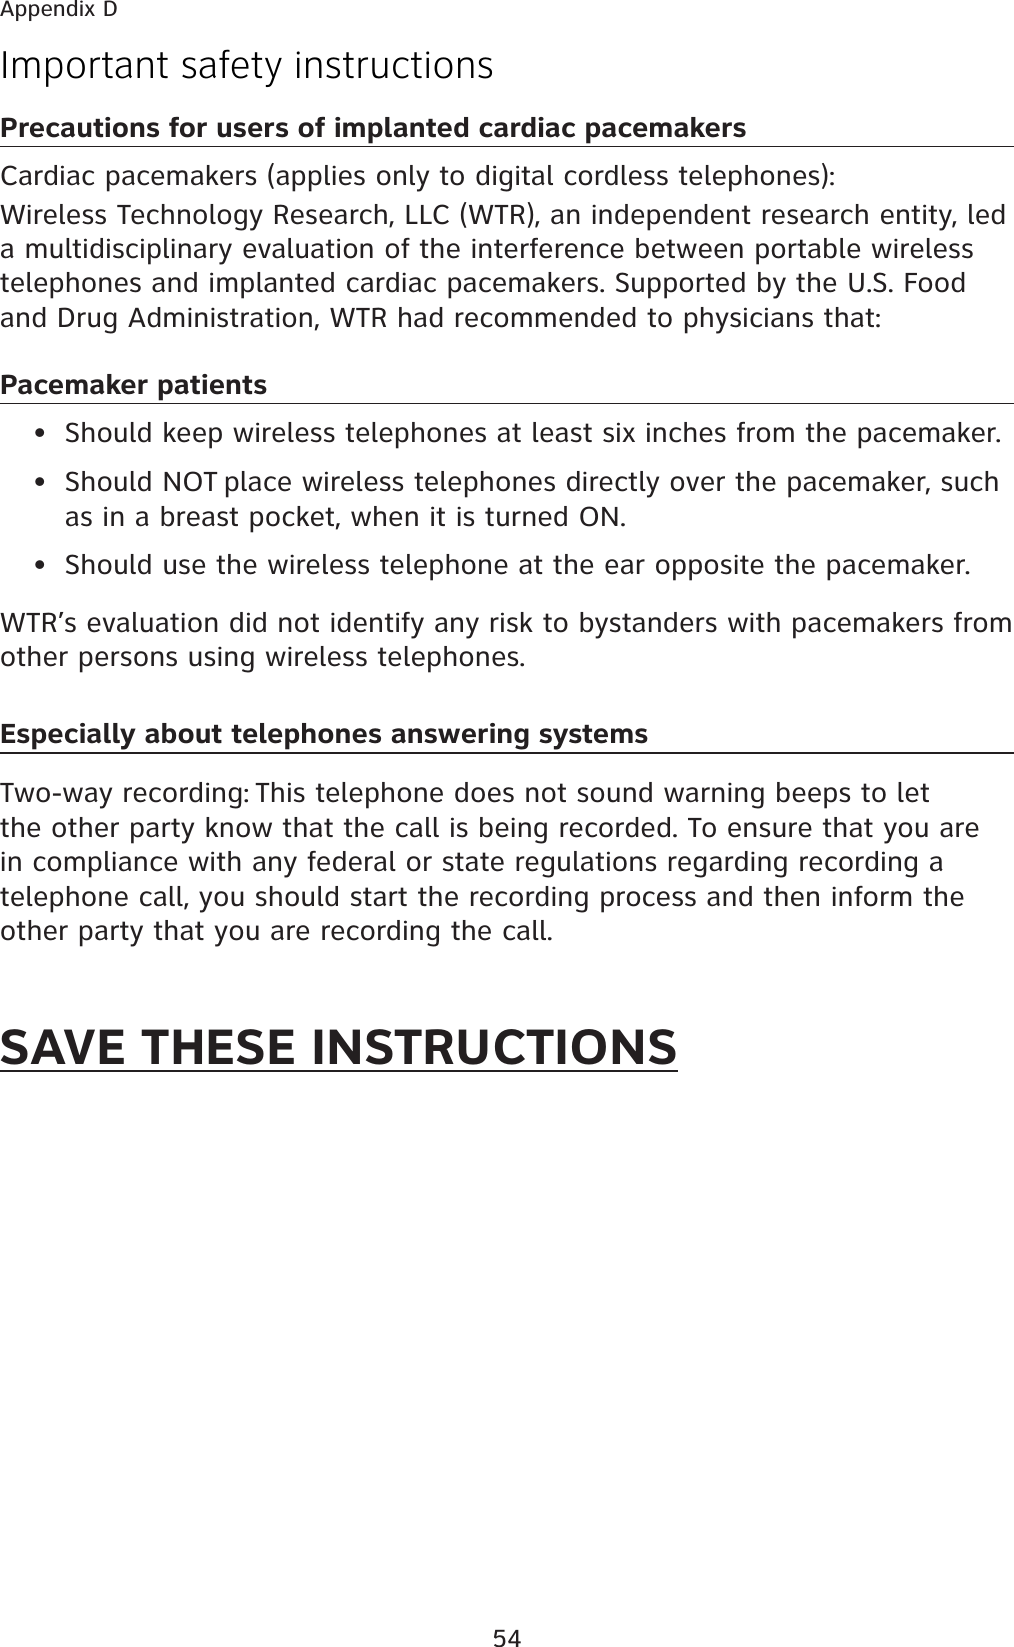 54Important safety instructionsPrecautions for users of implanted cardiac pacemakersCardiac pacemakers (applies only to digital cordless telephones): Wireless Technology Research, LLC (WTR), an independent research entity, led a multidisciplinary evaluation of the interference between portable wireless telephones and implanted cardiac pacemakers. Supported by the U.S. Food and Drug Administration, WTR had recommended to physicians that:Pacemaker patients•  Should keep wireless telephones at least six inches from the pacemaker.•  Should NOT place wireless telephones directly over the pacemaker, such as in a breast pocket, when it is turned ON.•  Should use the wireless telephone at the ear opposite the pacemaker.WTR’s evaluation did not identify any risk to bystanders with pacemakers from other persons using wireless telephones.Especially about telephones answering systemsTwo-way recording: This telephone does not sound warning beeps to let the other party know that the call is being recorded. To ensure that you are in compliance with any federal or state regulations regarding recording a telephone call, you should start the recording process and then inform the other party that you are recording the call.SAVE THESE INSTRUCTIONSAppendix D